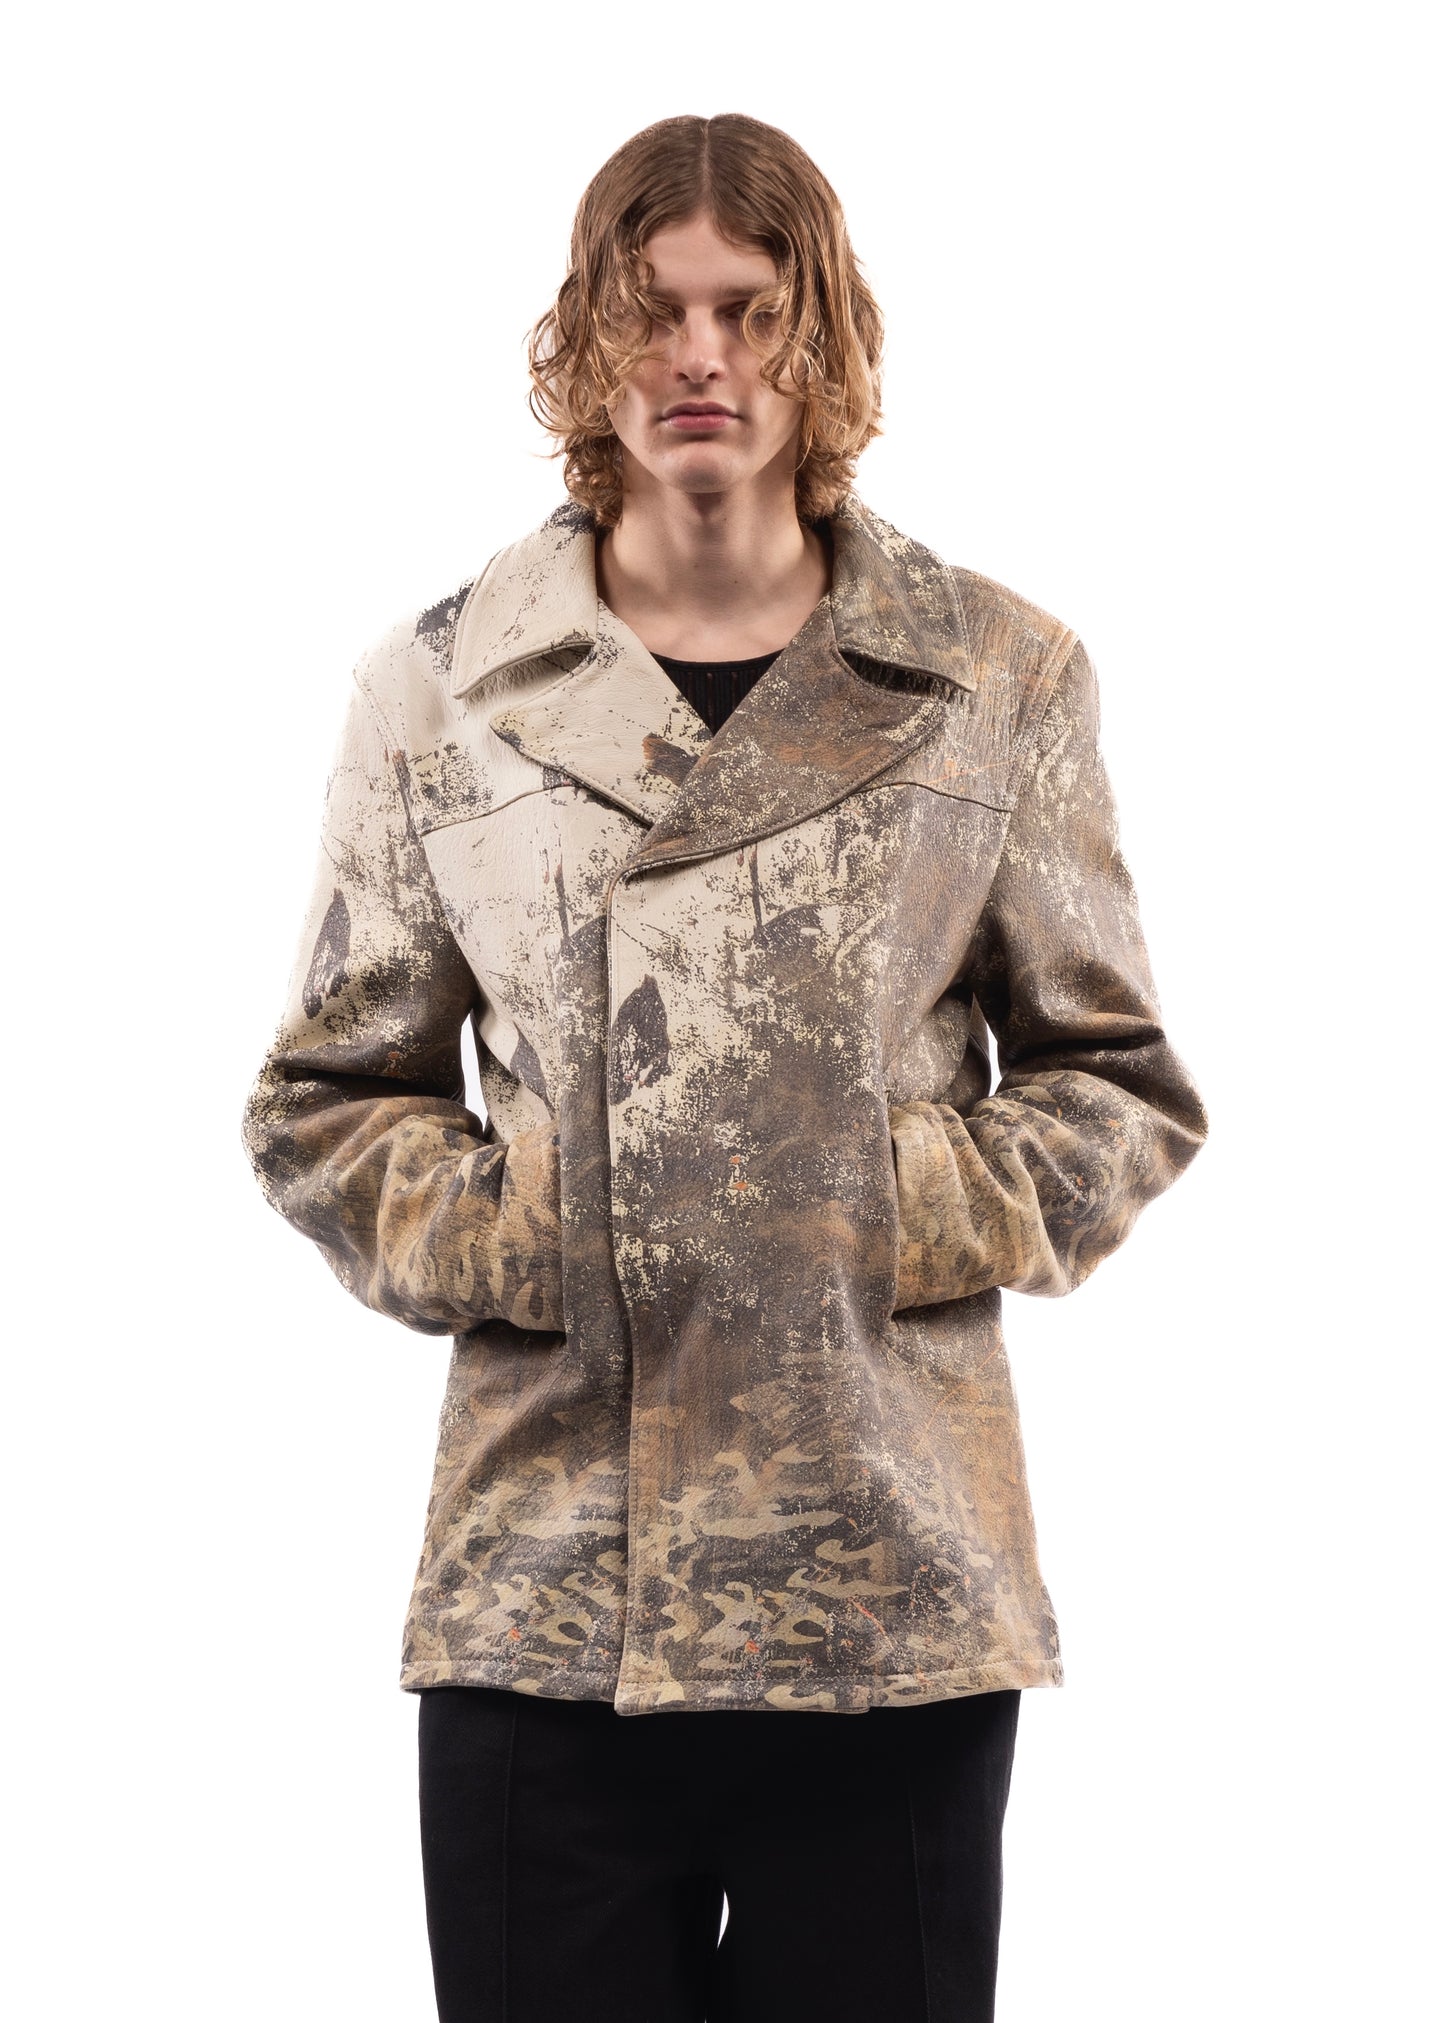 PRINTED CAMOUFLAGE LEATHER BLAZER